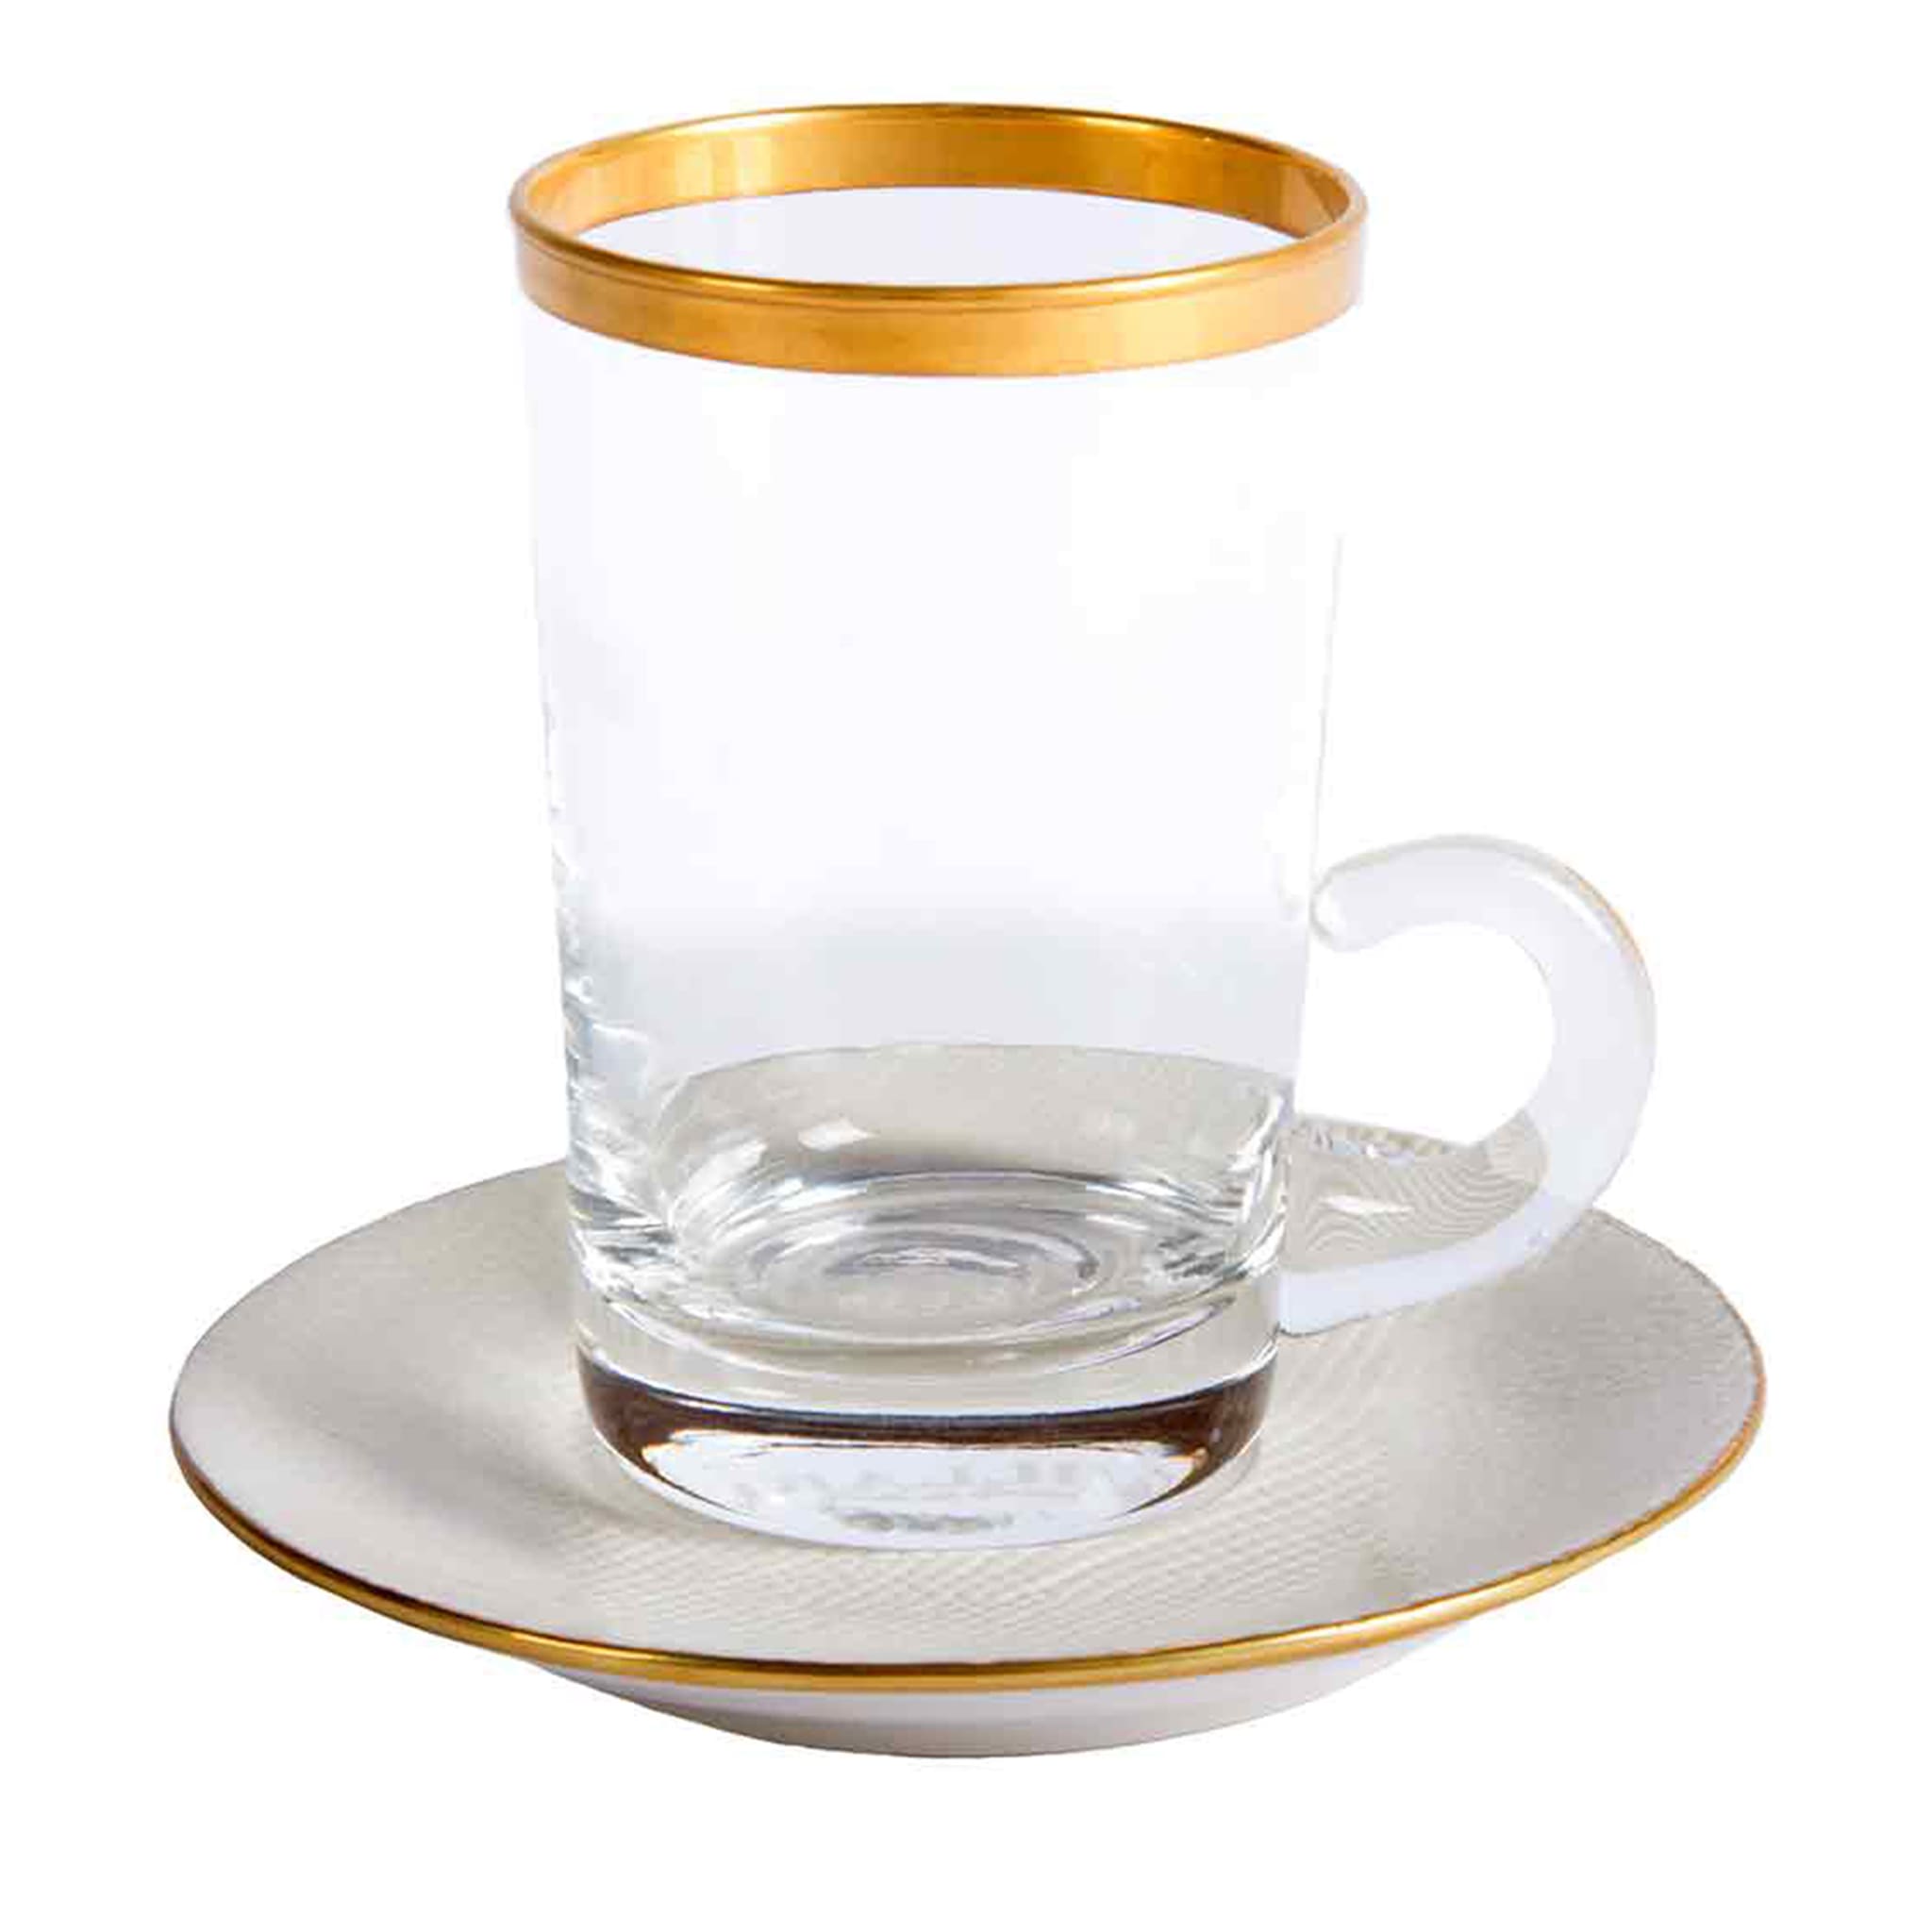 DRESSAGE GOLD TEA CUP AND SAUCER - Main view